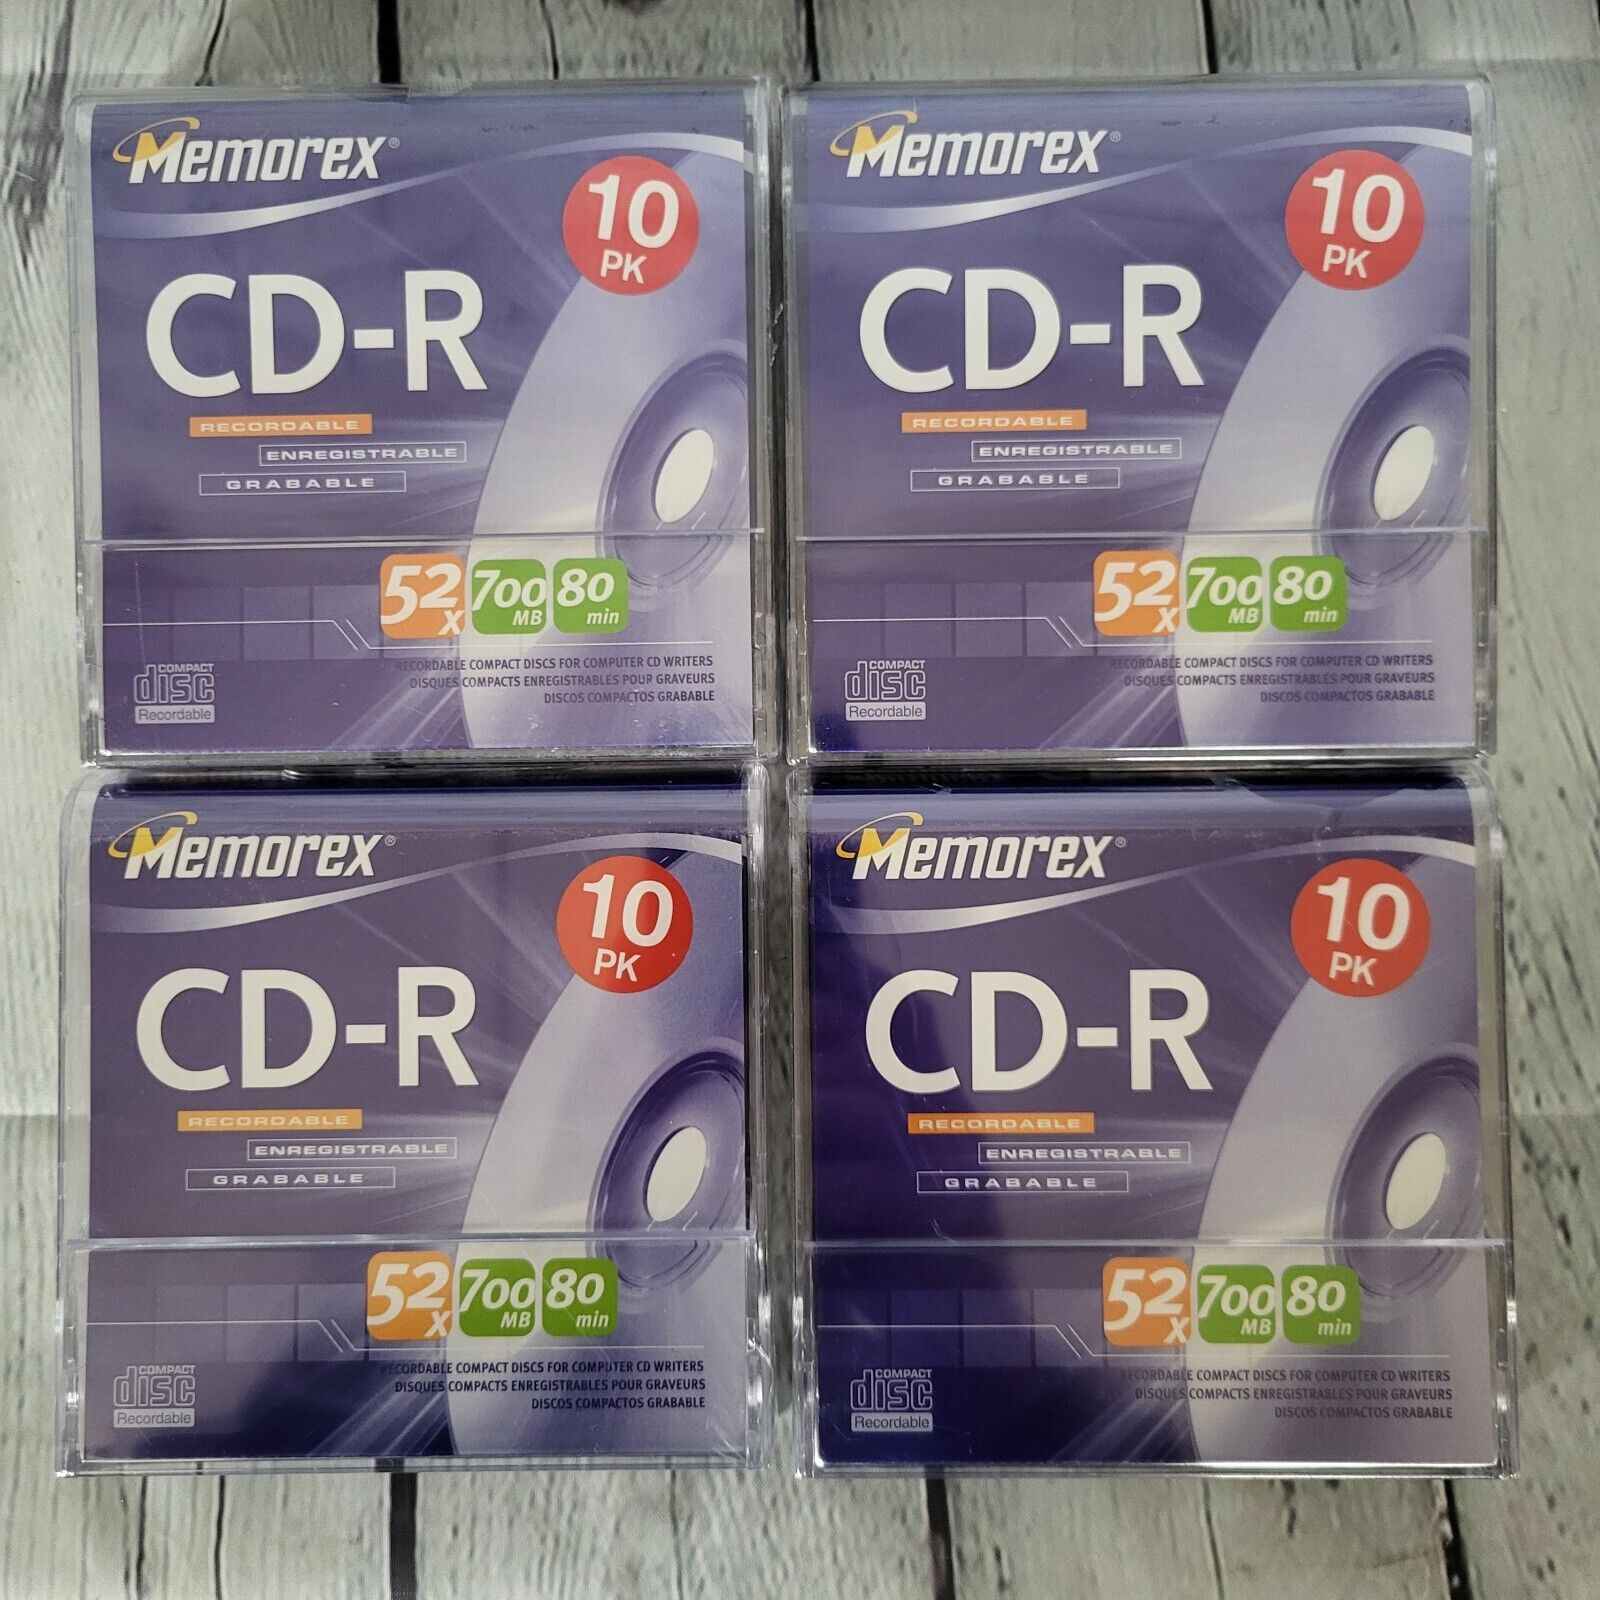 Memorex 10PK Lot of 4 Boxes CD-R 52X 700MB Recordable 40 Discs Factory Sealed 